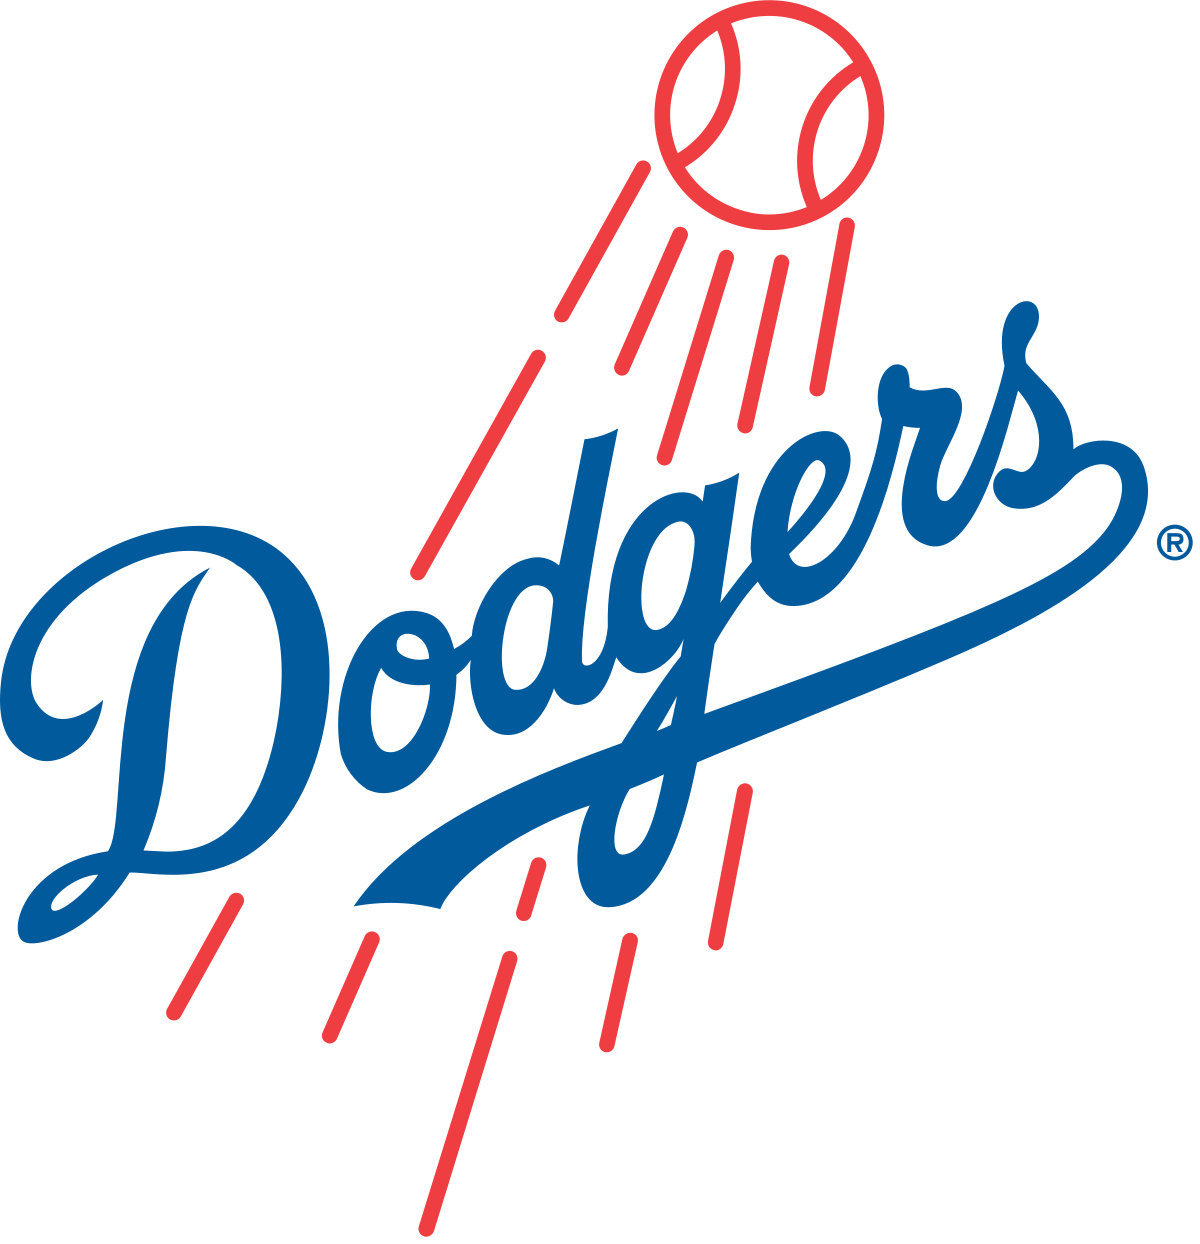 L.A. Dodgers honor anti-Catholic drag queens - The Catholic Thing